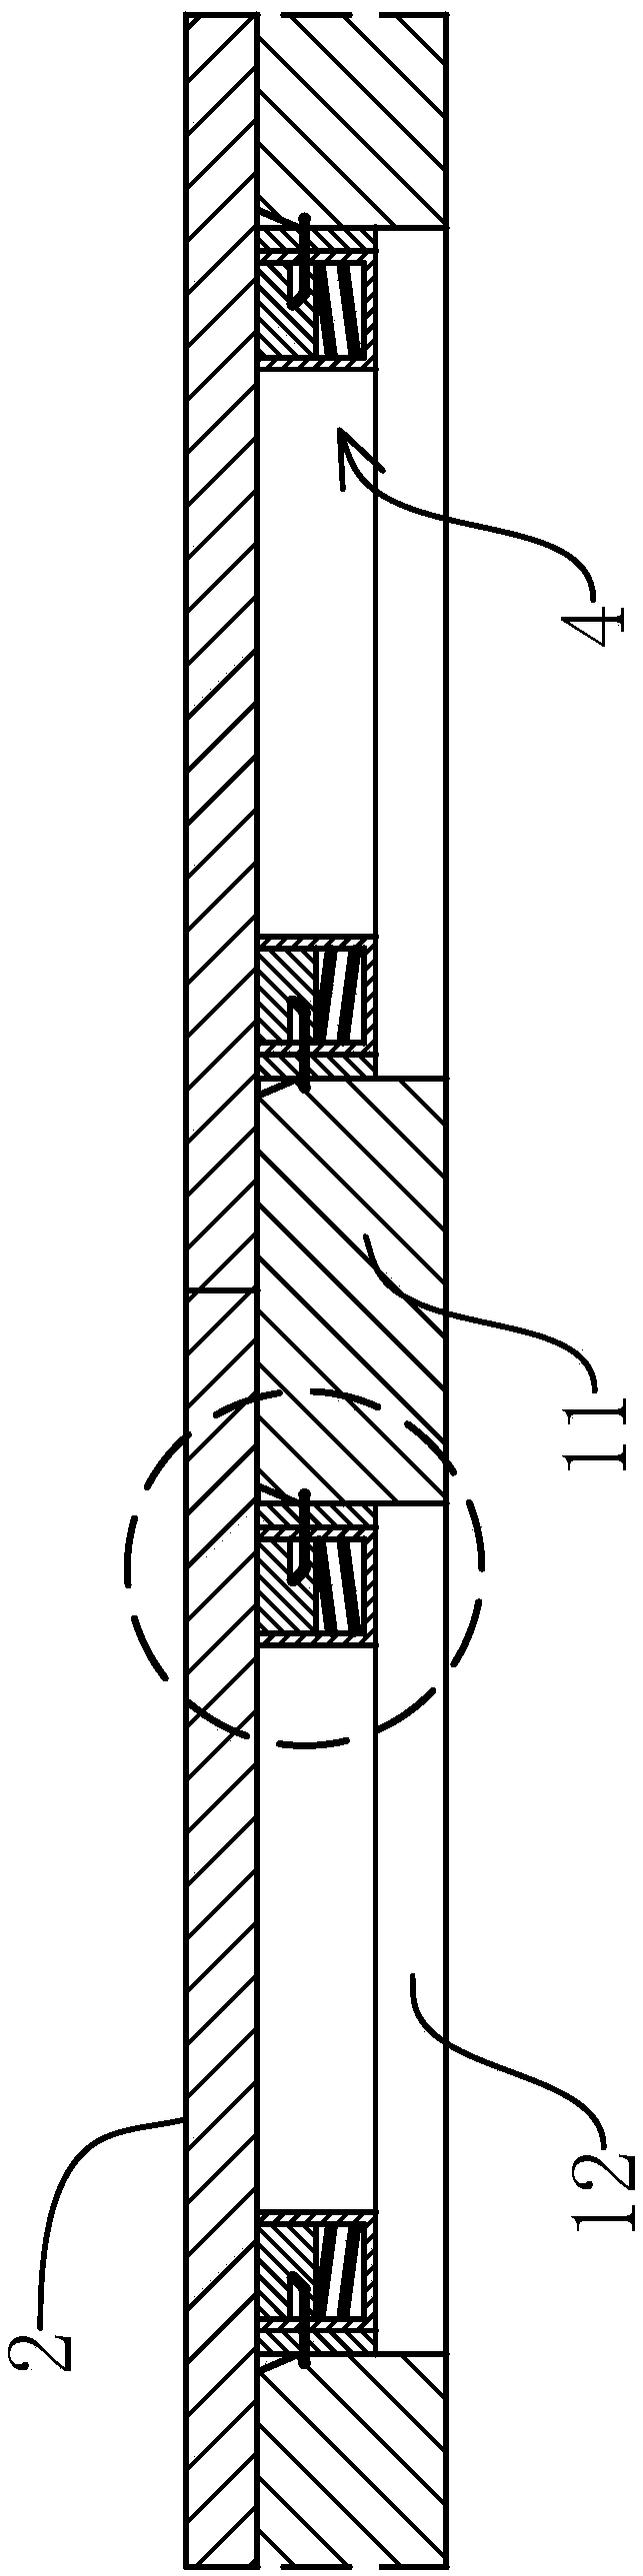 Full frame-hidden glass curtain wall and dismantling tool and method